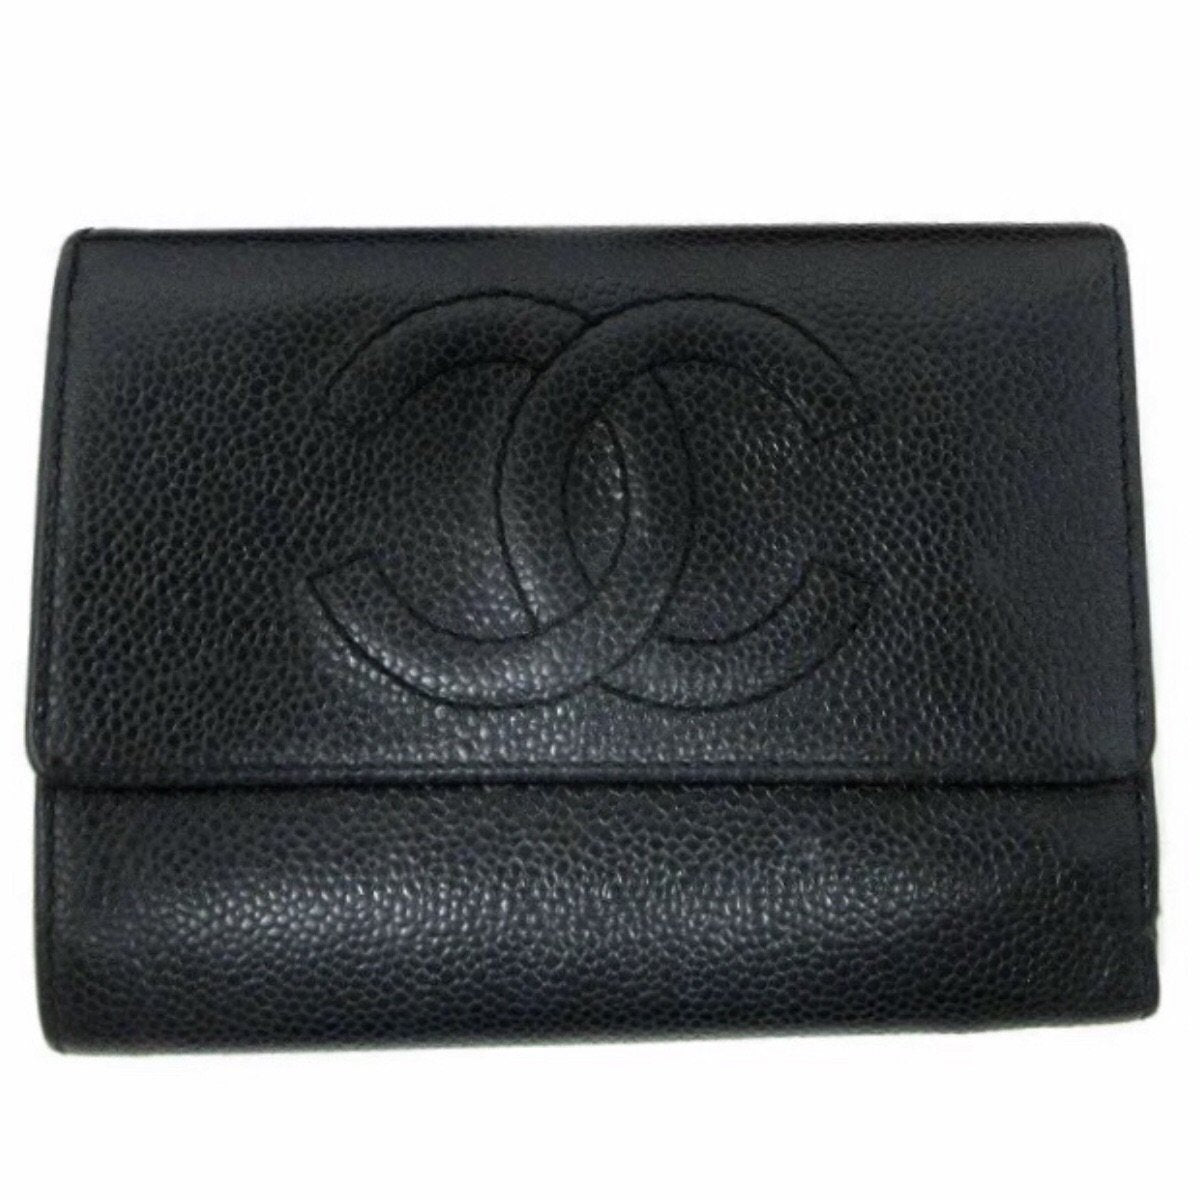 Timeless/classique leather wallet Chanel Black in Leather - 30566739